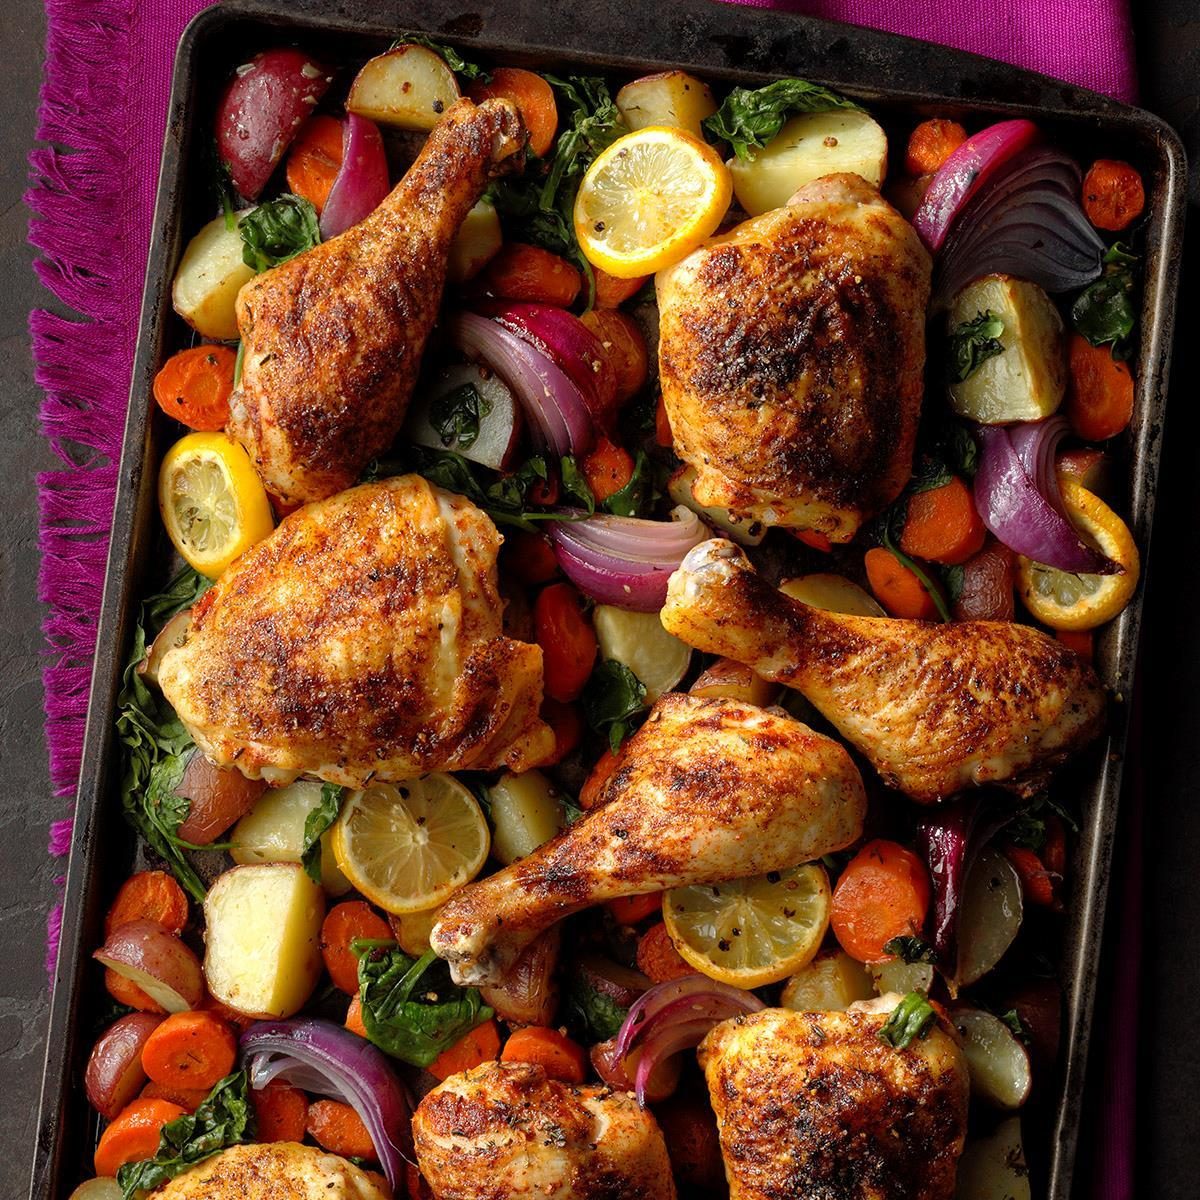 One Pan Roasted Chicken Vegetables Exps Opbz18 232860 B06 28 1b 17